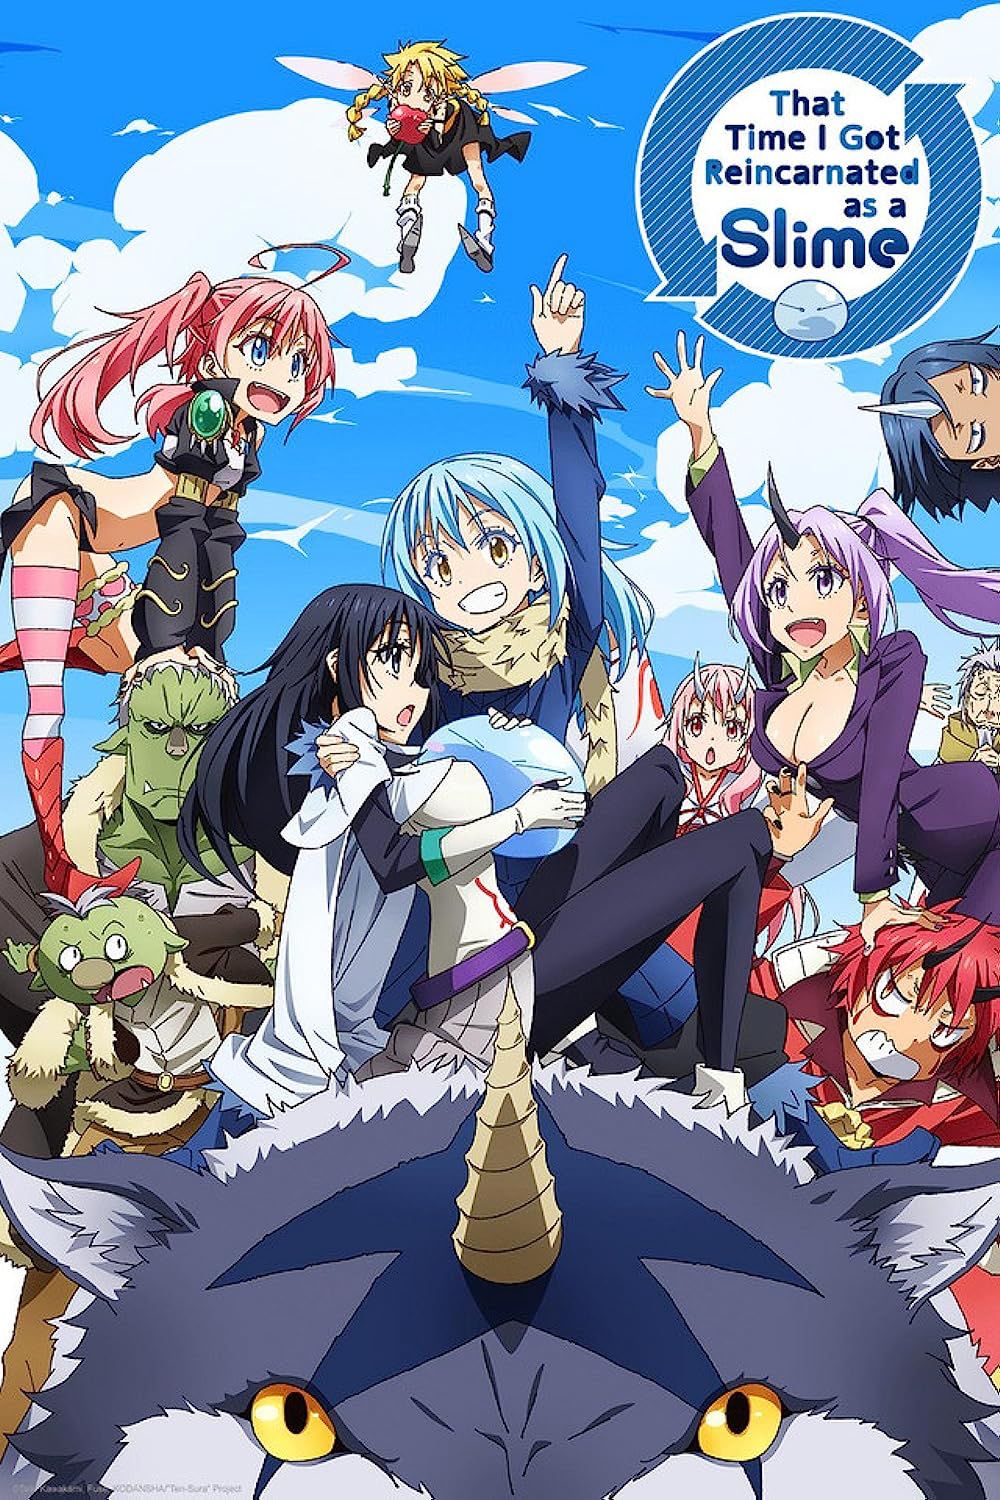 That Time I Got Reincarnated as a Slime TV Series Poster